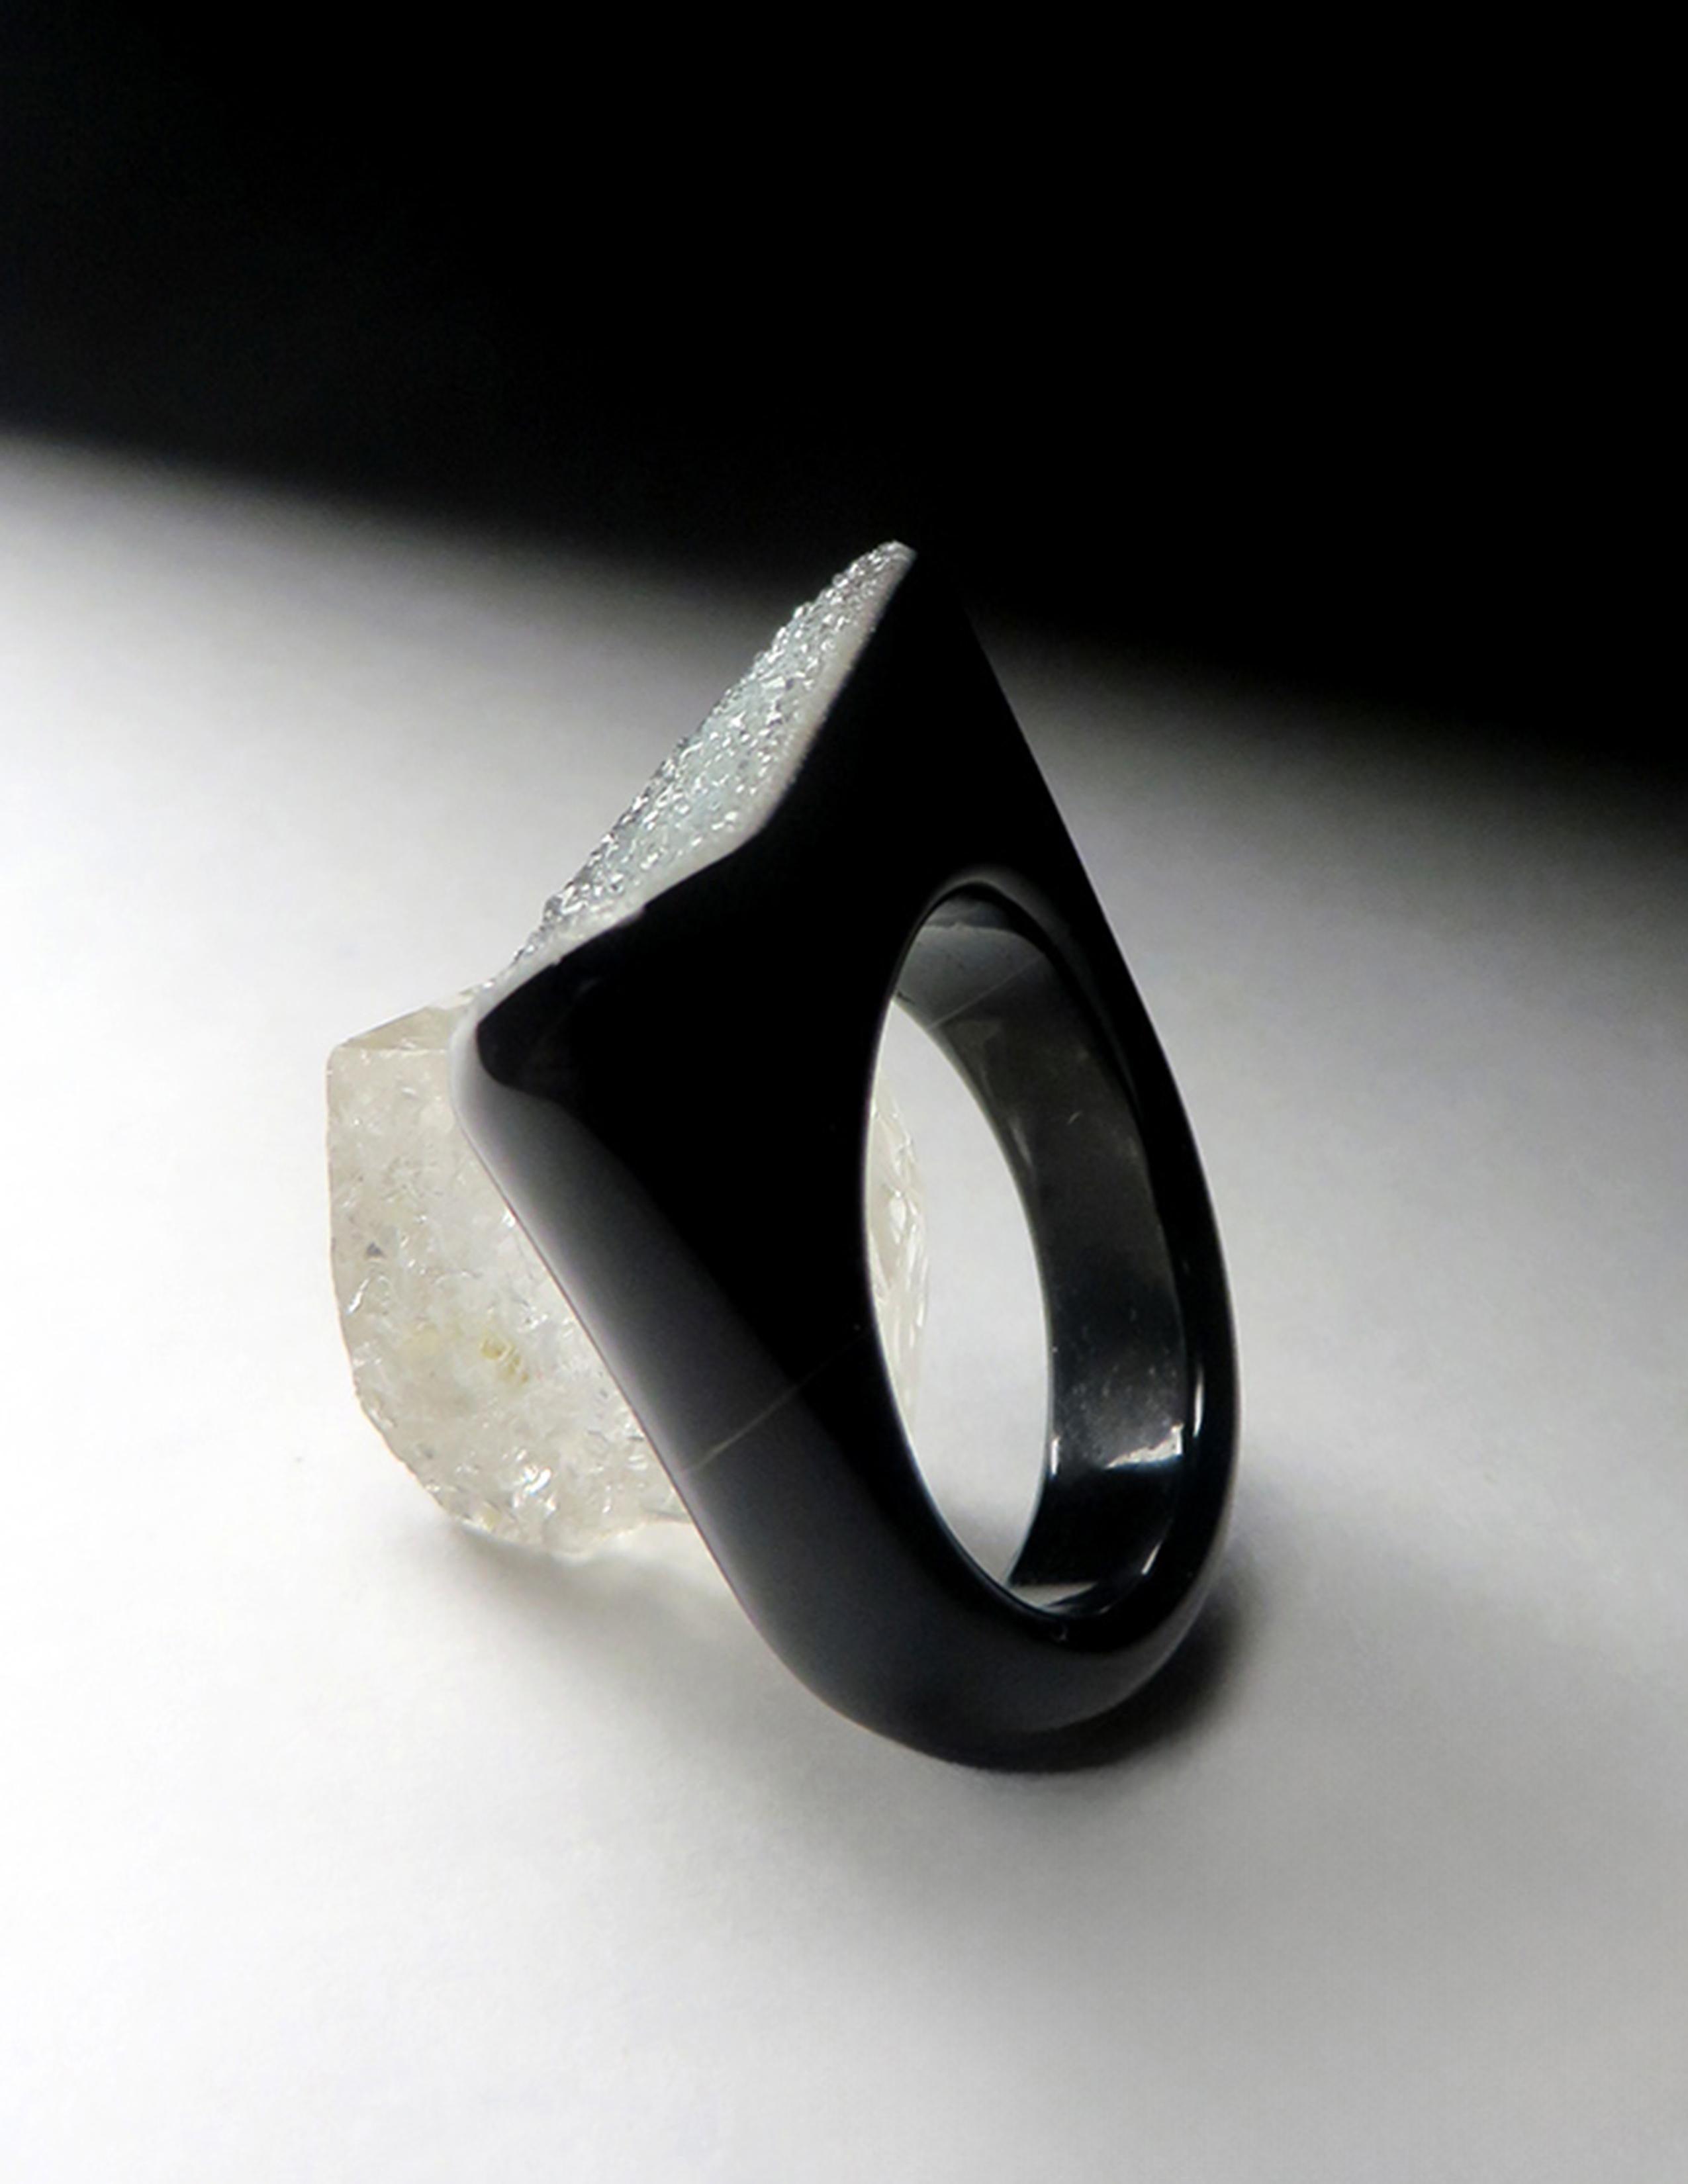 Women's or Men's Druzy Agate Quartz Crystals Ring Minimalism Solid Stone Midnight Black Mens Ring For Sale